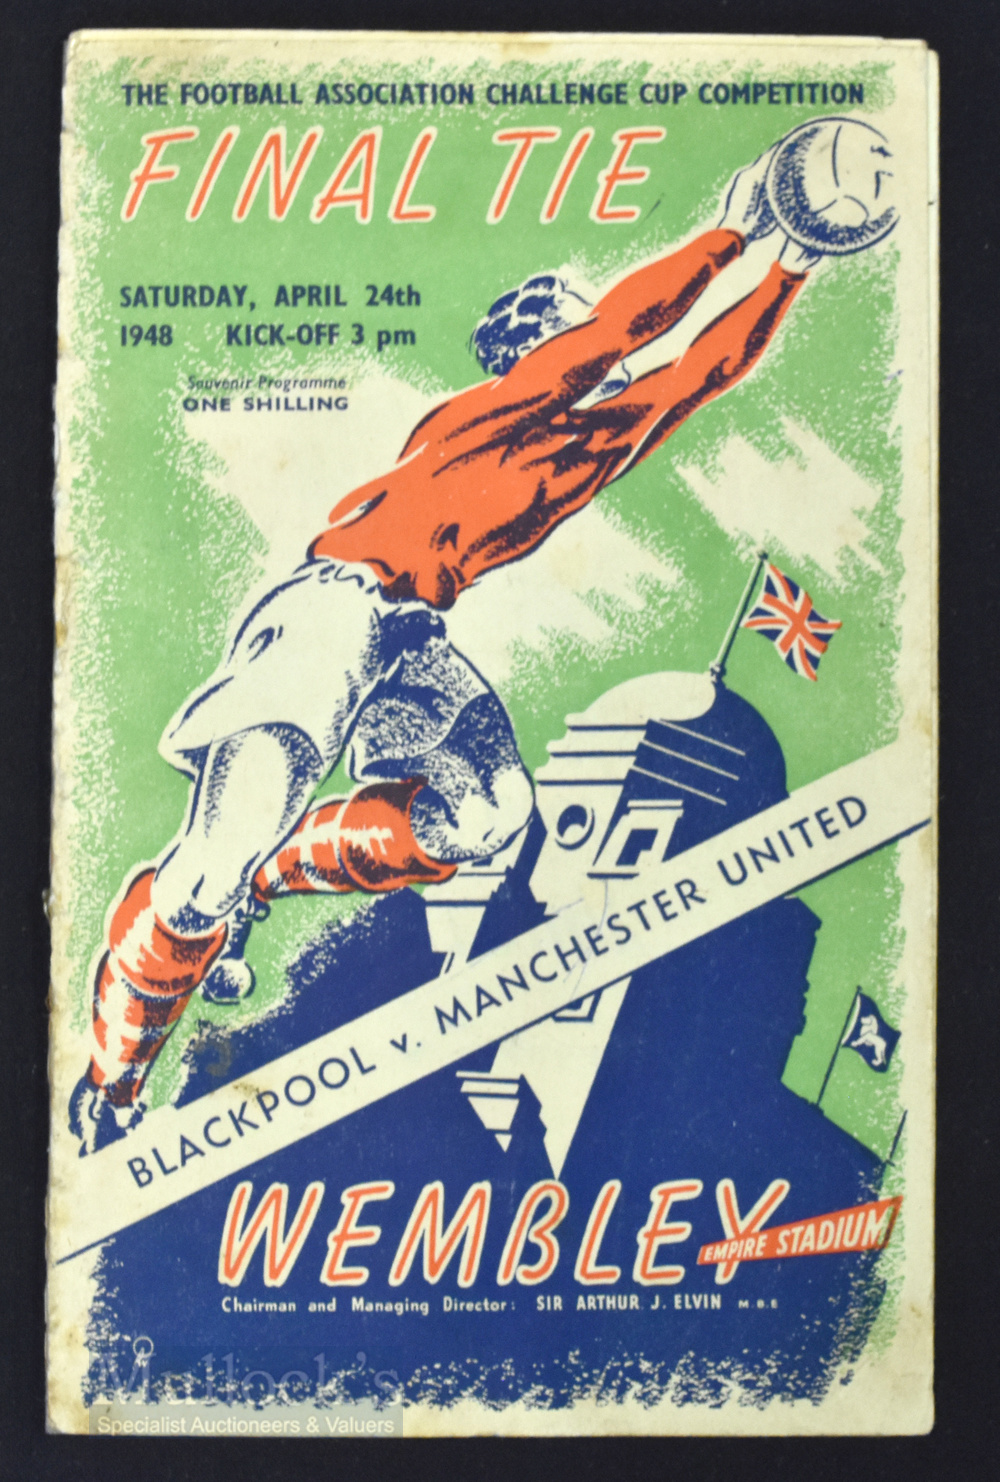 1948 FA Cup final match programme at Wembley Manchester Utd v Blackpool 24 April 1948; staple